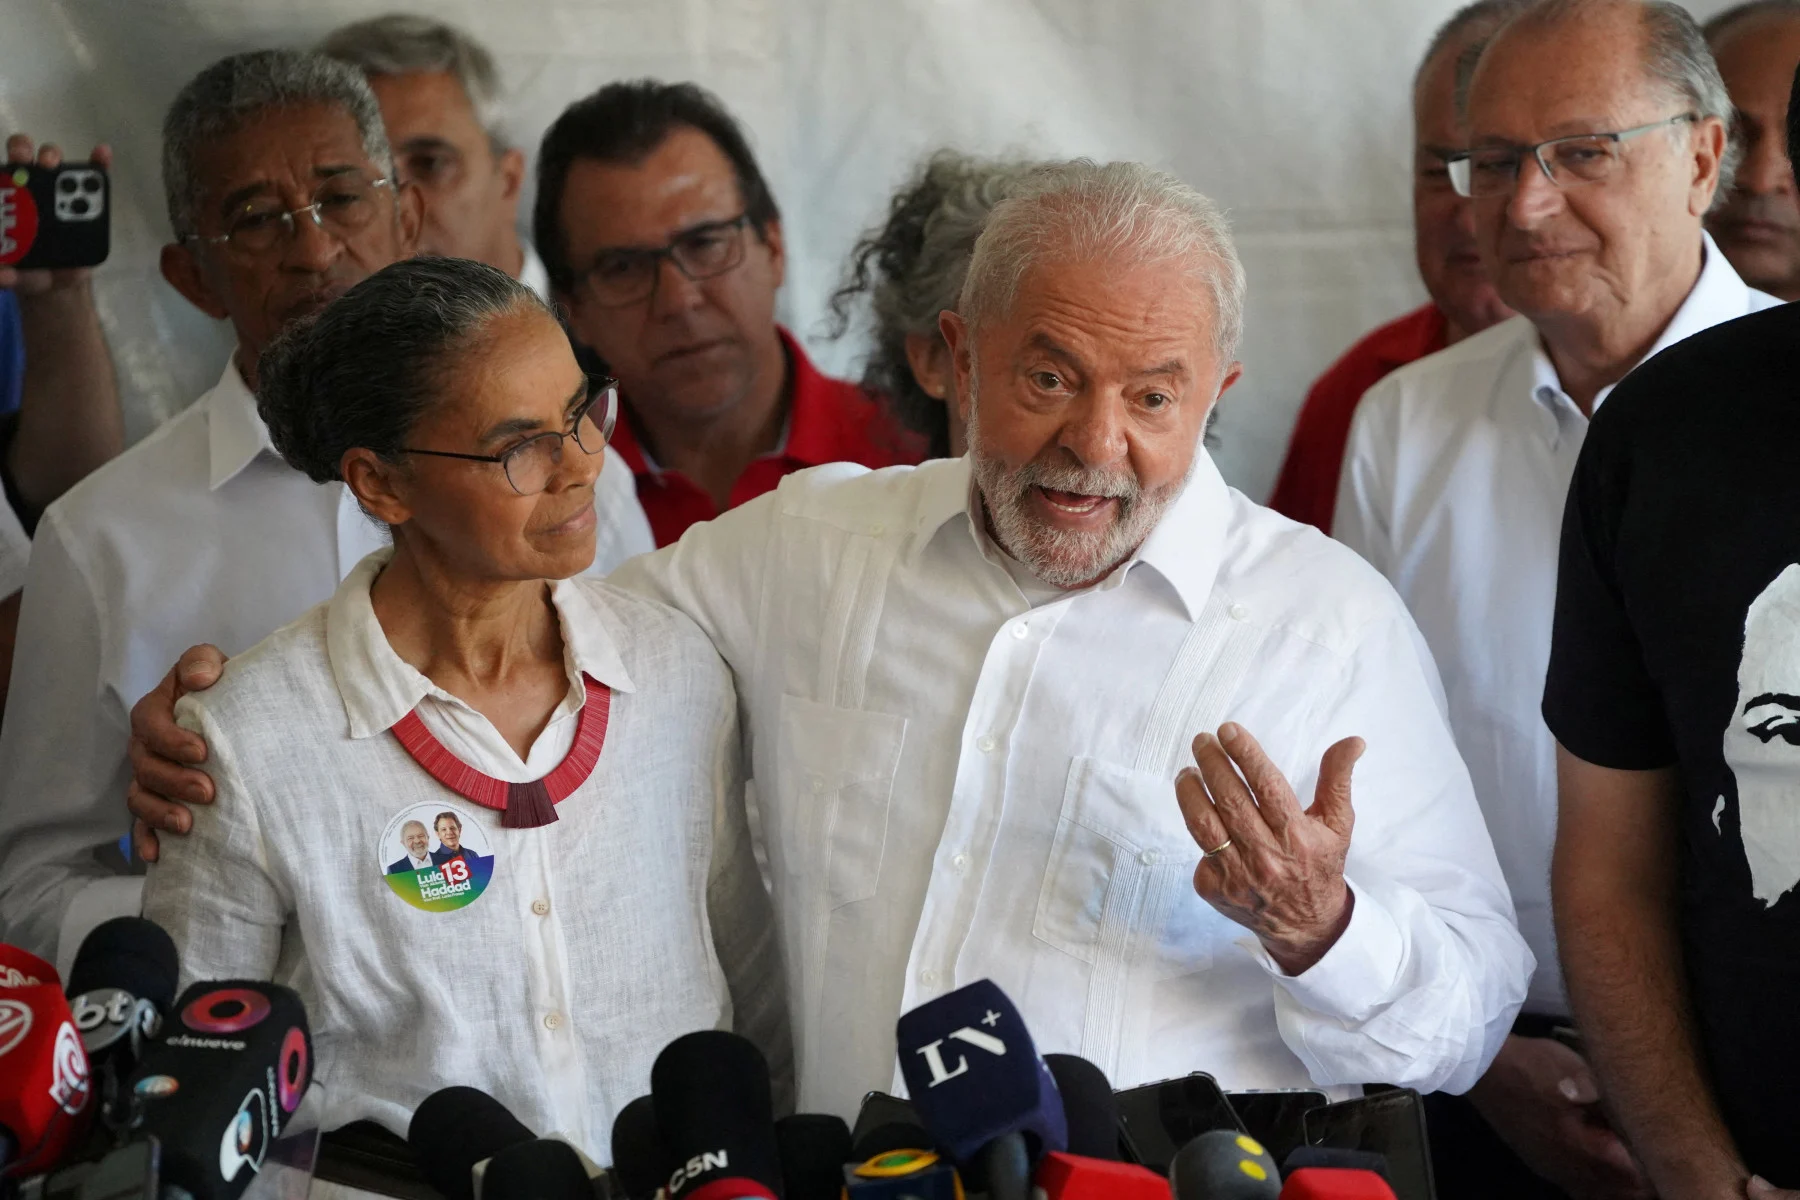 Brazil's former President and presidential candidate Luiz Inacio Lula da Silva holds a news conference along with Former Minister of Environment Marina Silva, after casting his vote during the presidential election, in Sao Bernardo do Campo, on the outskirts of Sao Paulo, Brazil October 30, 2022. REUTERS/Mariana Greif/File Photo